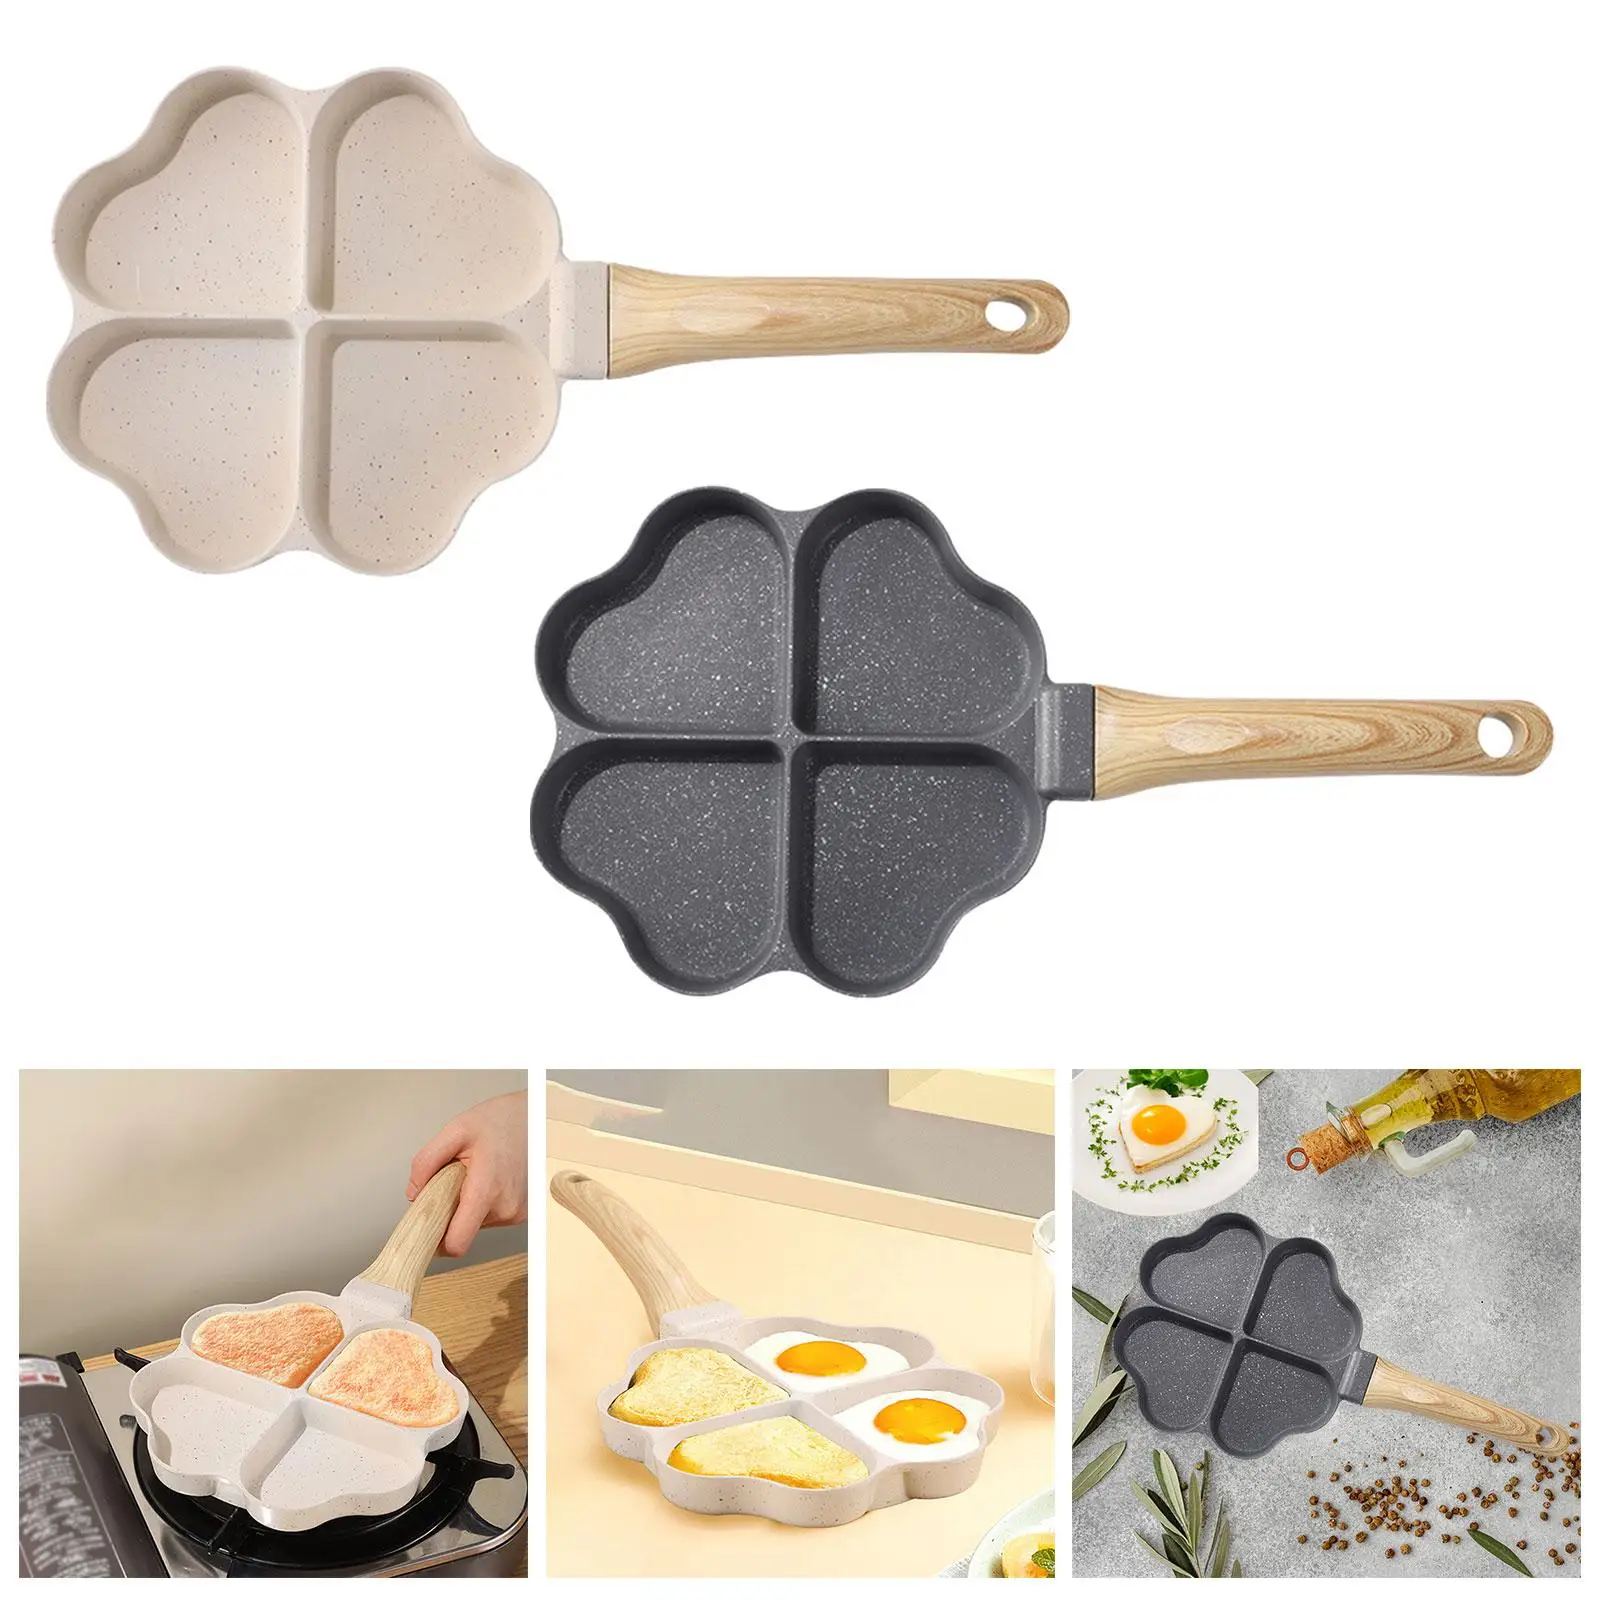 Omelet Pan Anti Scald Wood Handle Kitchen Cooking Tool Divided Egg Skillet Egg Cooker Pan for Cooking Baking Frying Vegetable